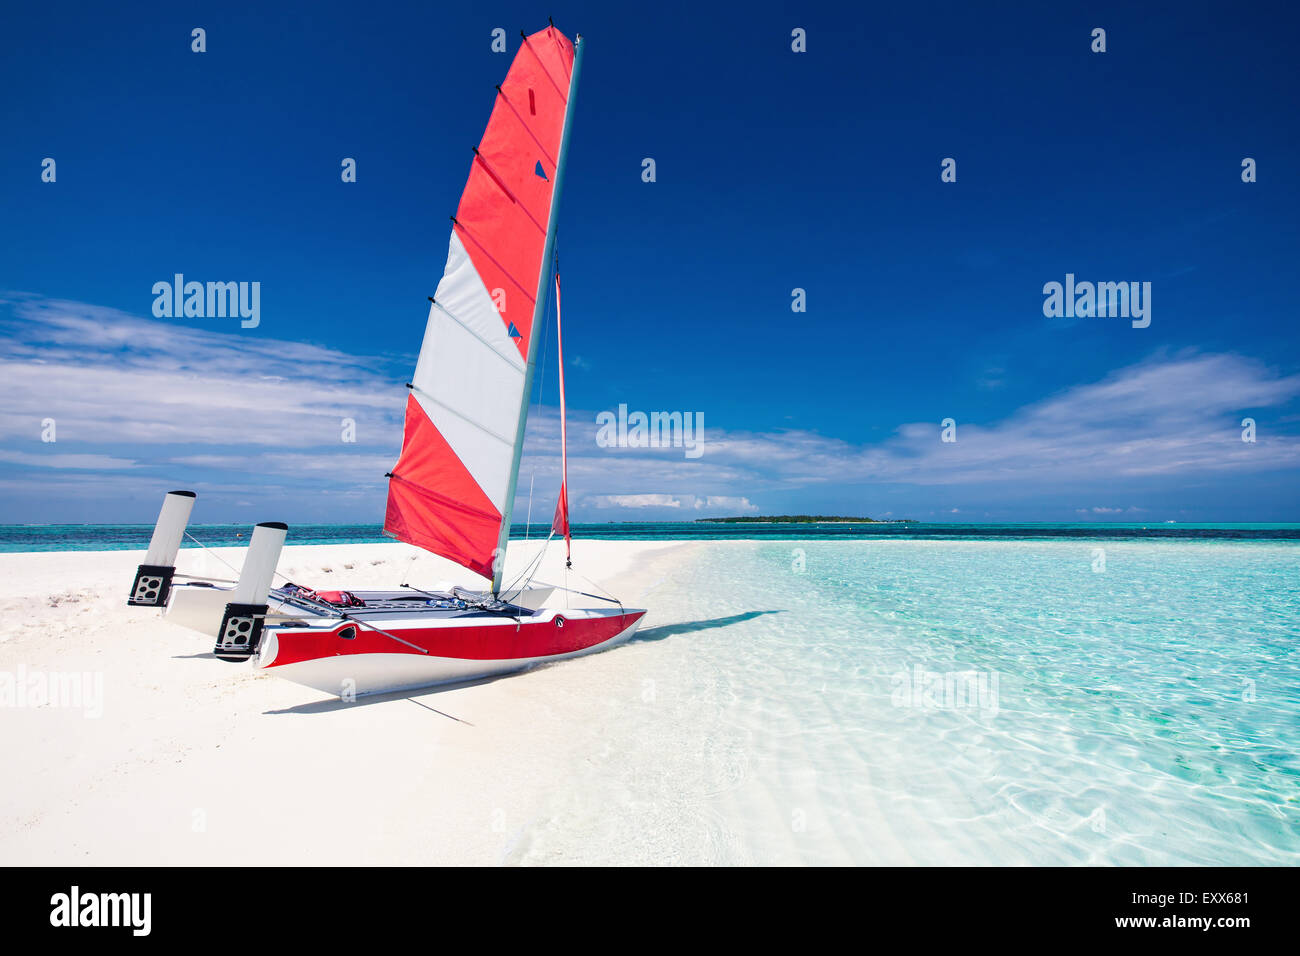 Sailing boat with red sail on a beach of deserted tropical island with shallow blue water Stock Photo